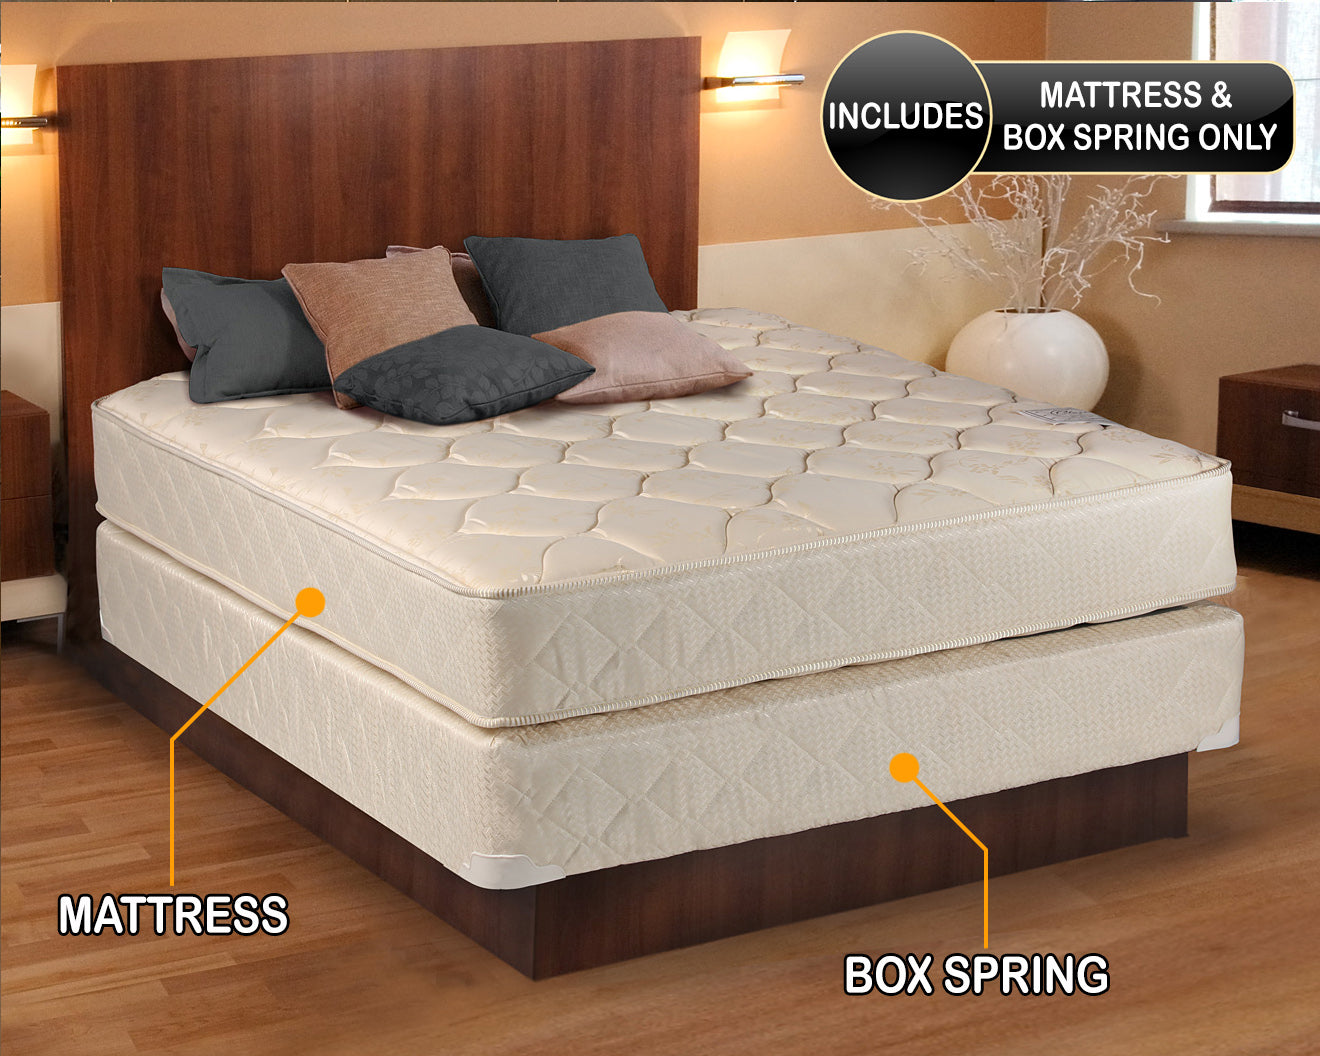 Comfort Classic 2-Sided King Size Gentle Firm Mattress and Box Spring Set - Spinal Support System, Fully Assembled, Orthopedic, Long Lasting